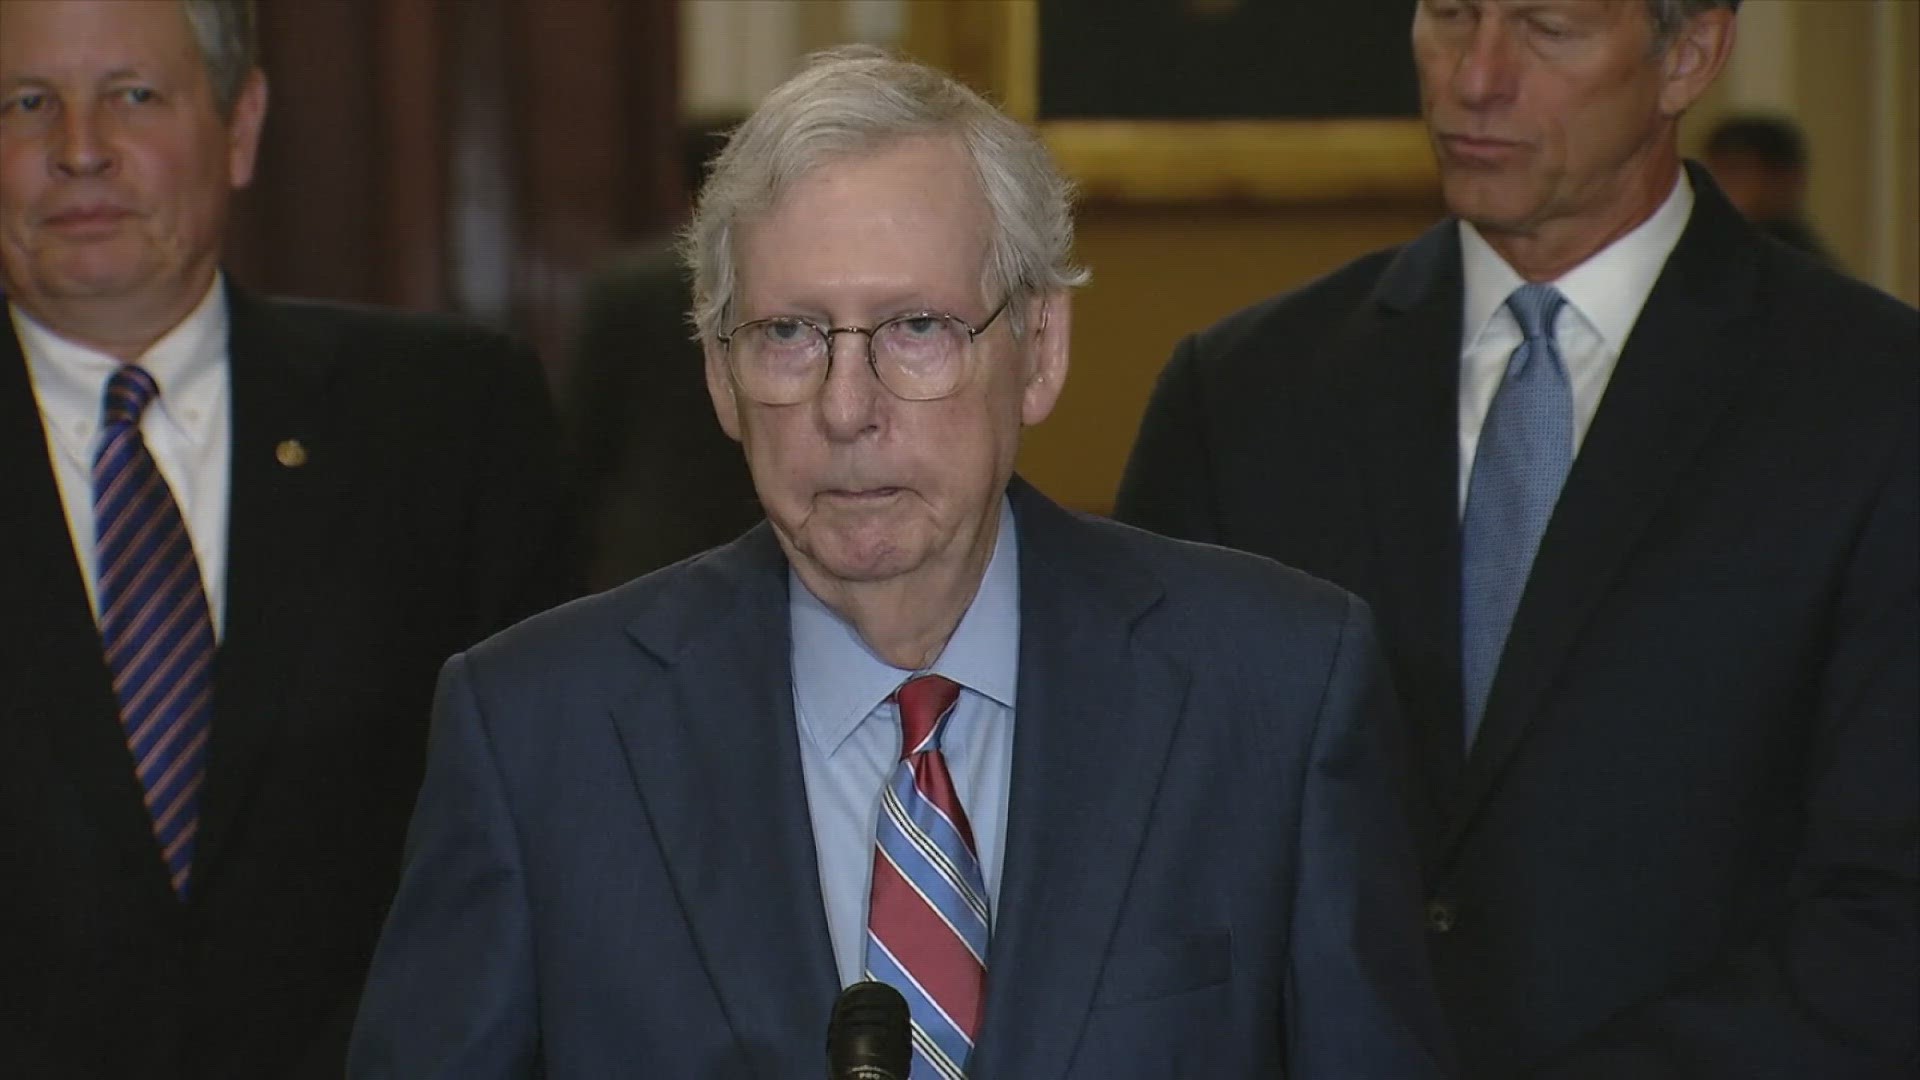 Sen. Mitch McConnell made light of the frightening moment when he was seemingly unable to speak to reporters.